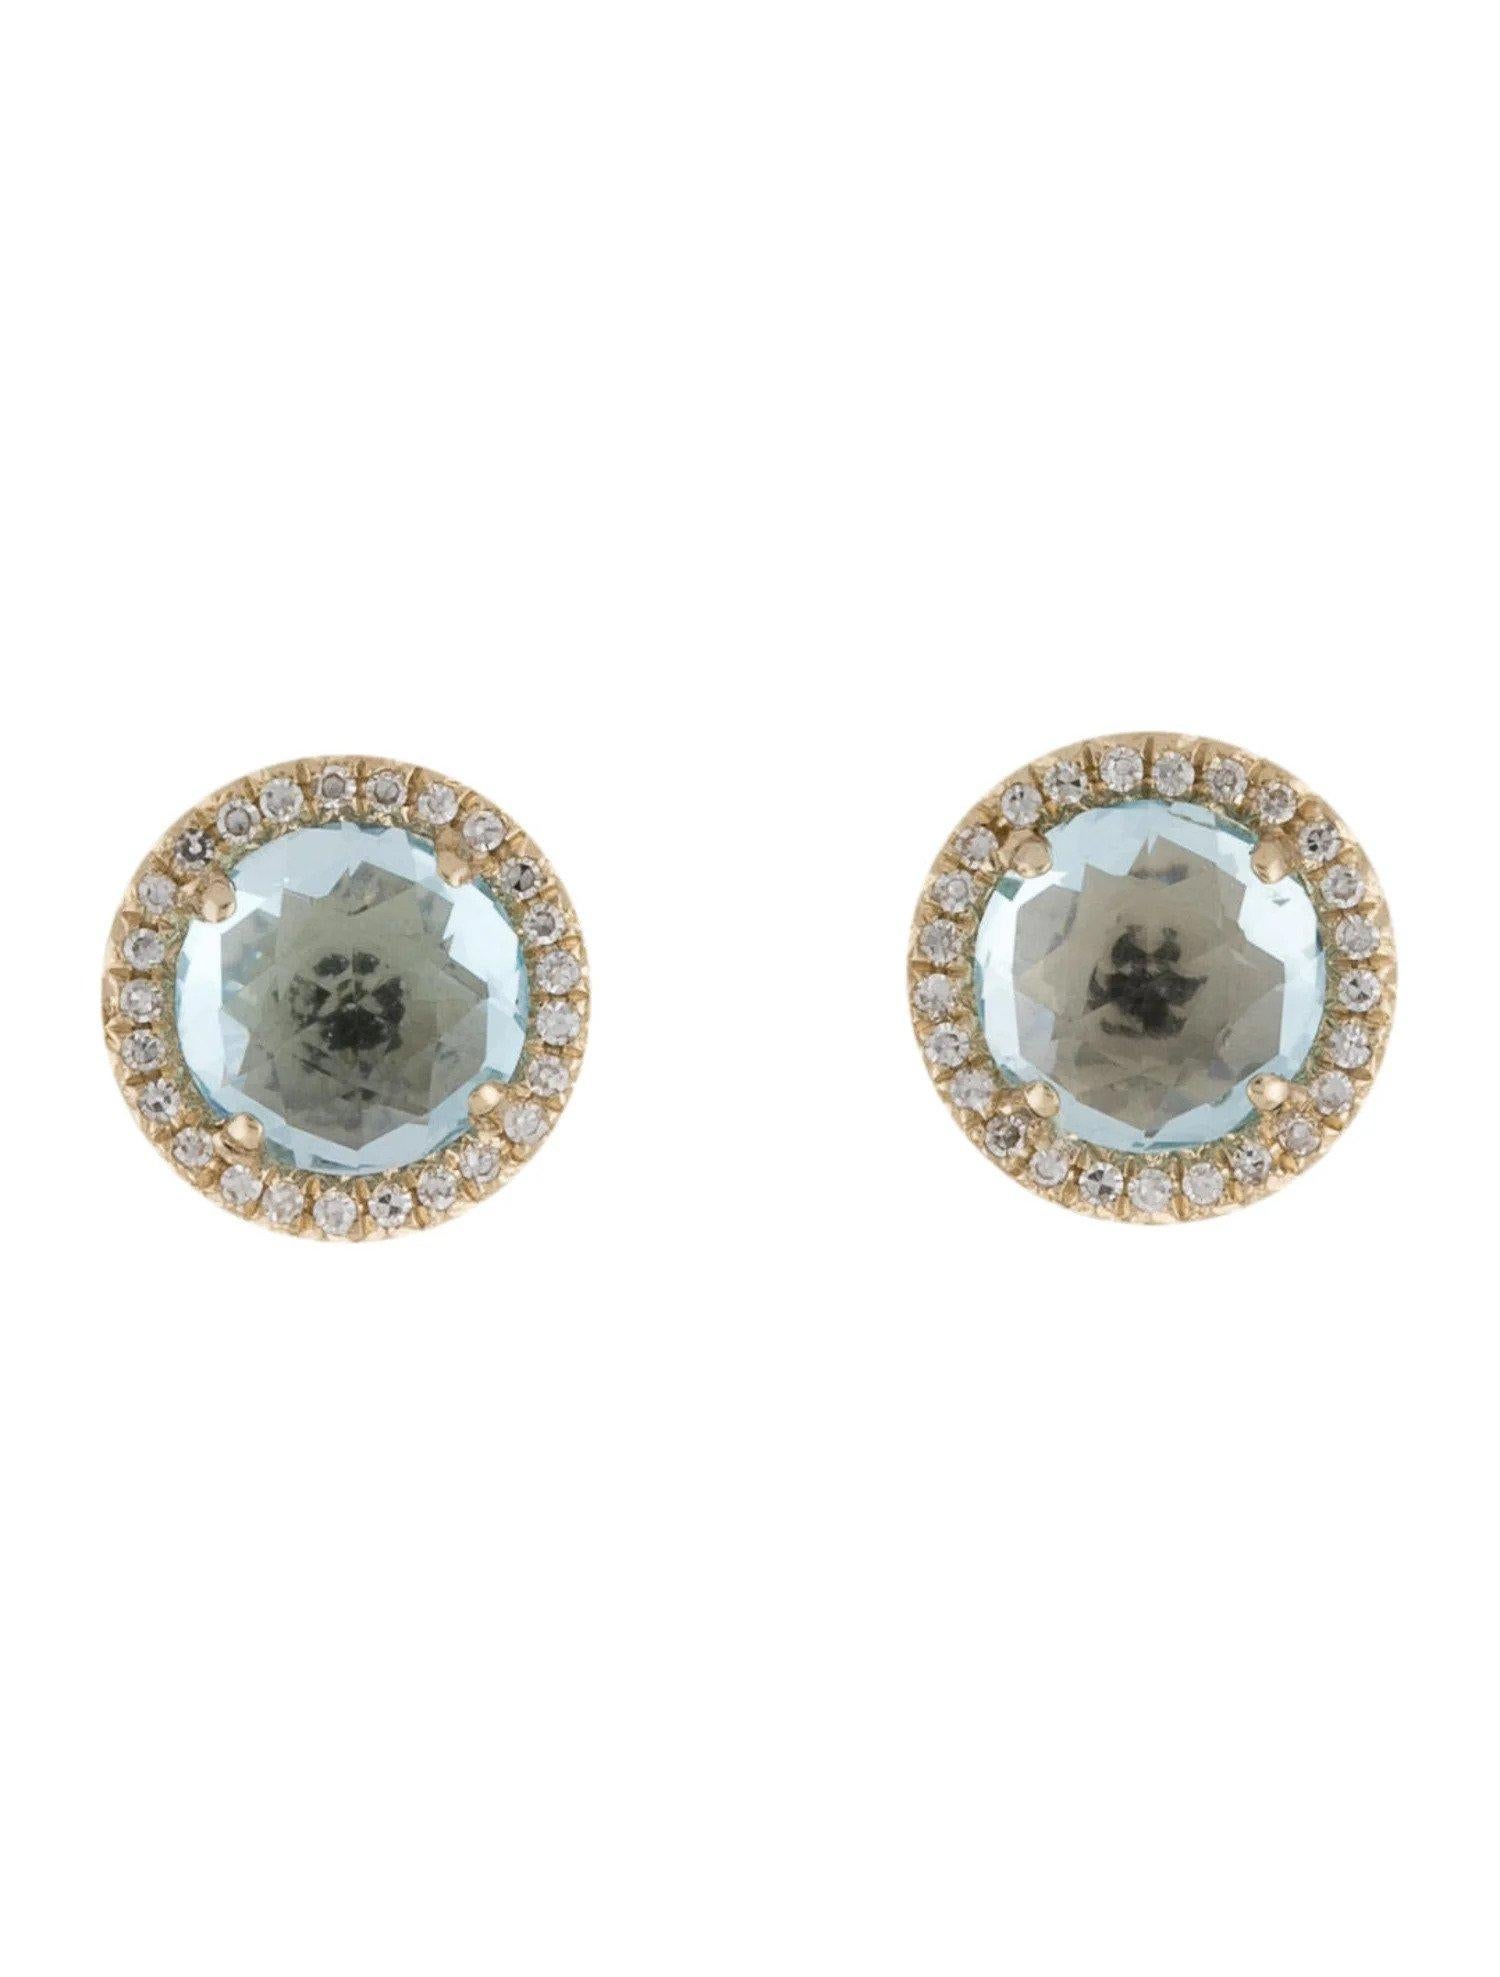 Round Cut 2.39 Carat Round Blue Topaz & Diamond Yellow Gold Stud Earrings For Sale